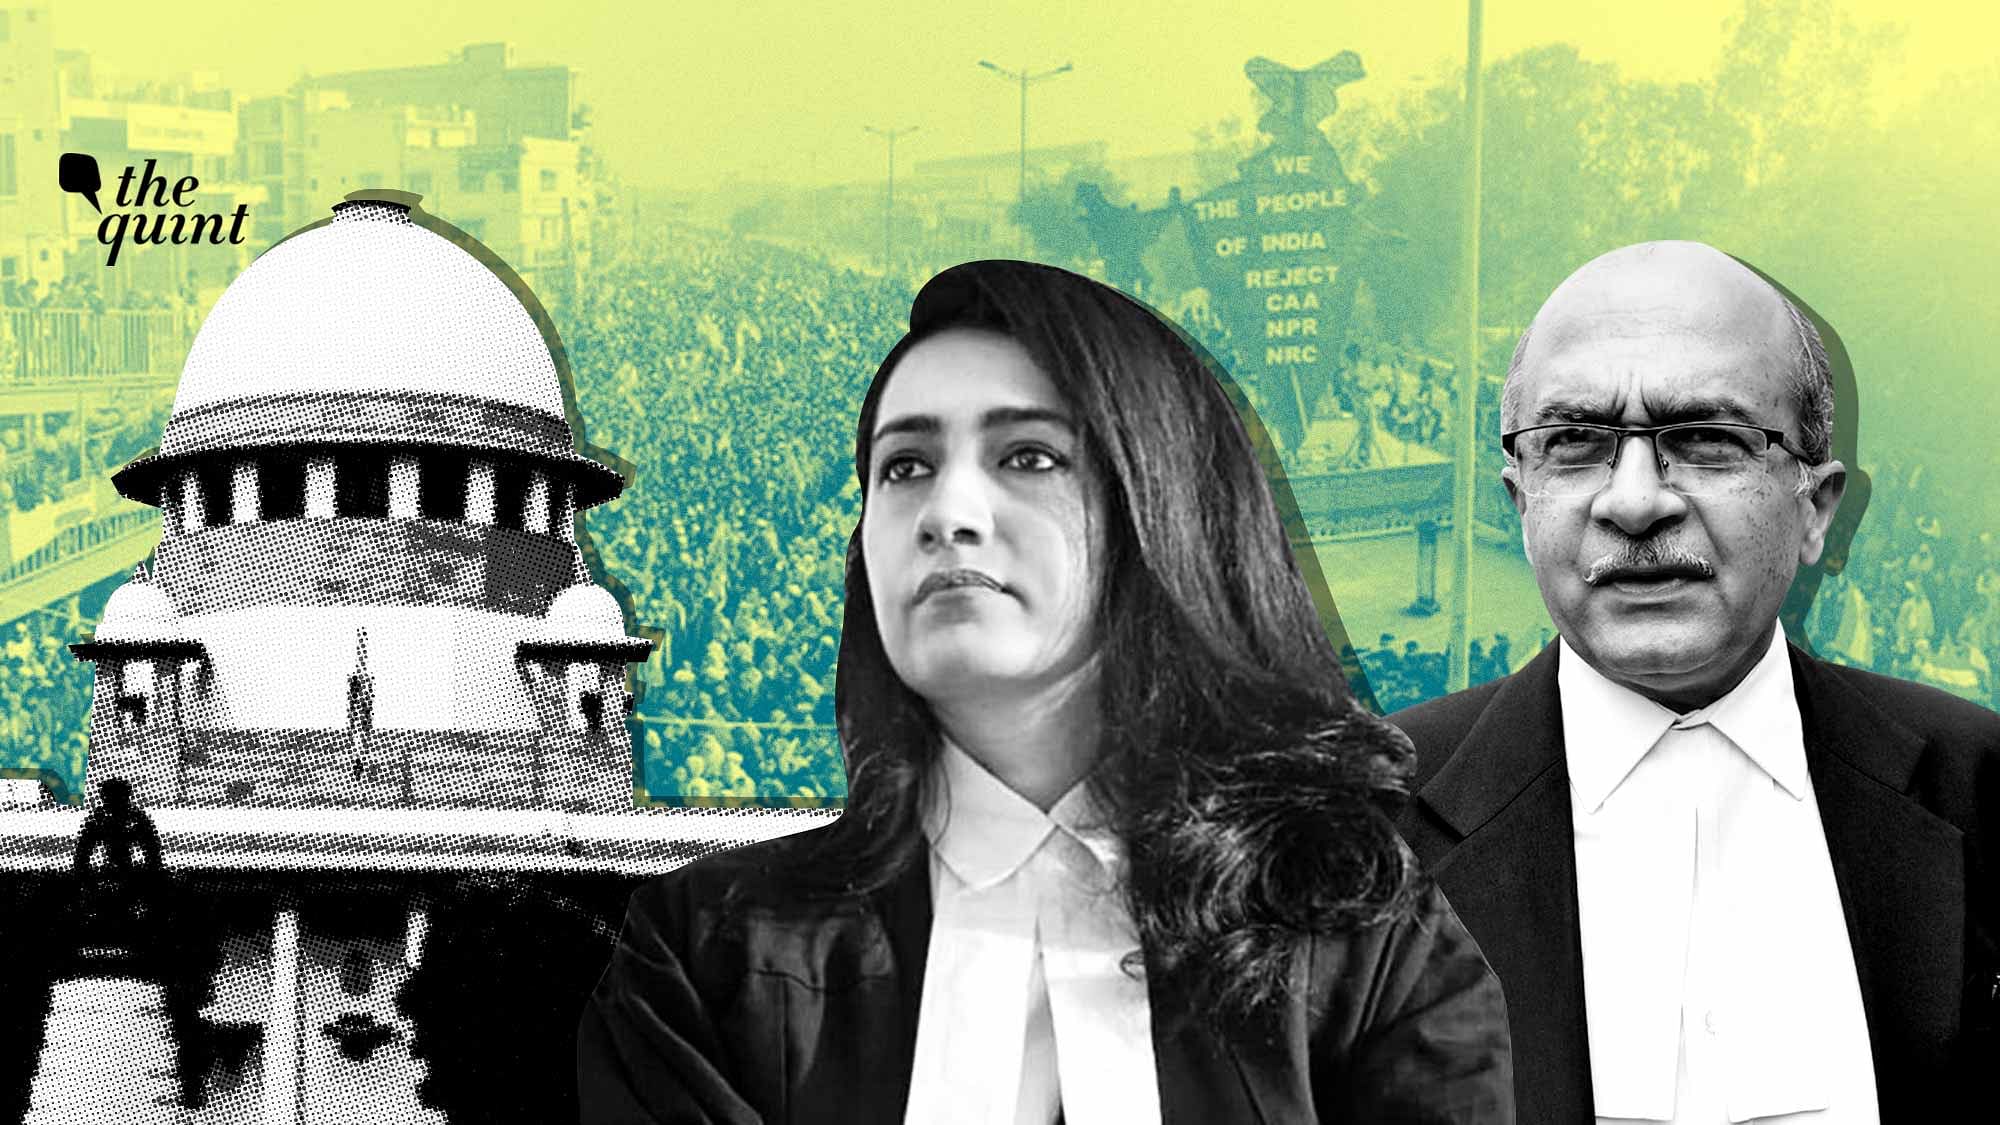 Karuna Nundy and Prashant Bhushan explain why the Supreme Court’s Shaheen Bagh judgment is legally suspect.